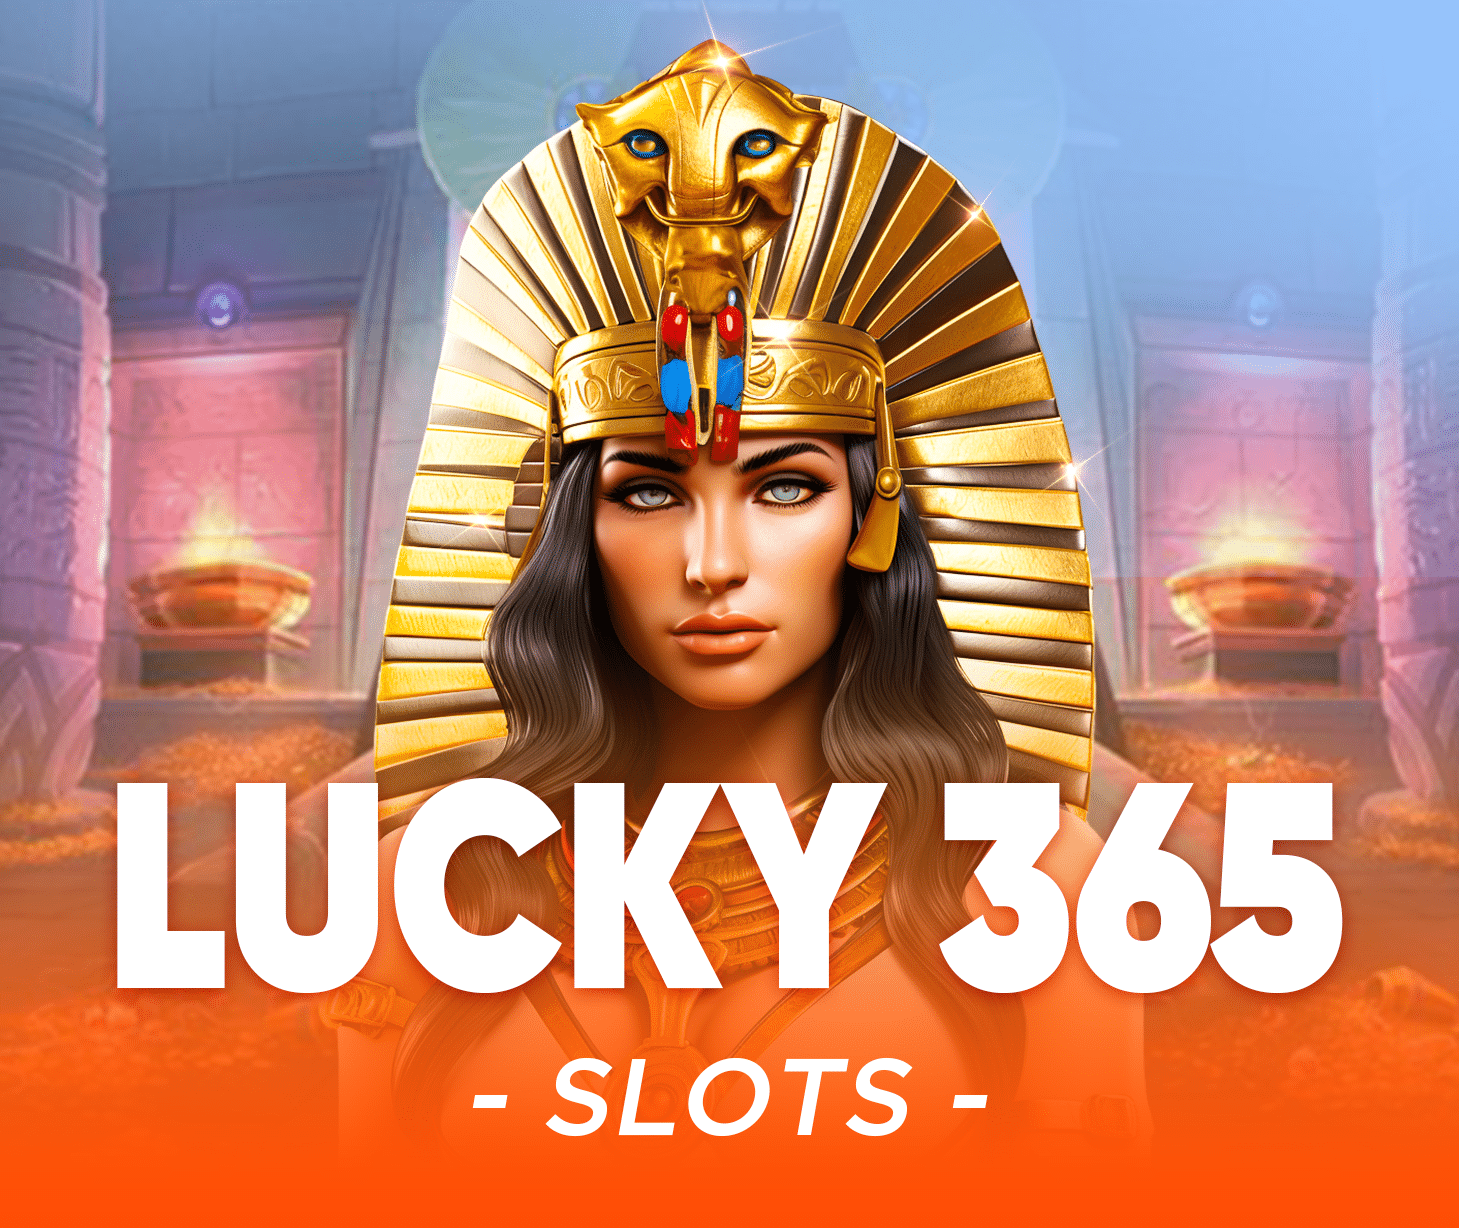 lucky365 online slot malaysia